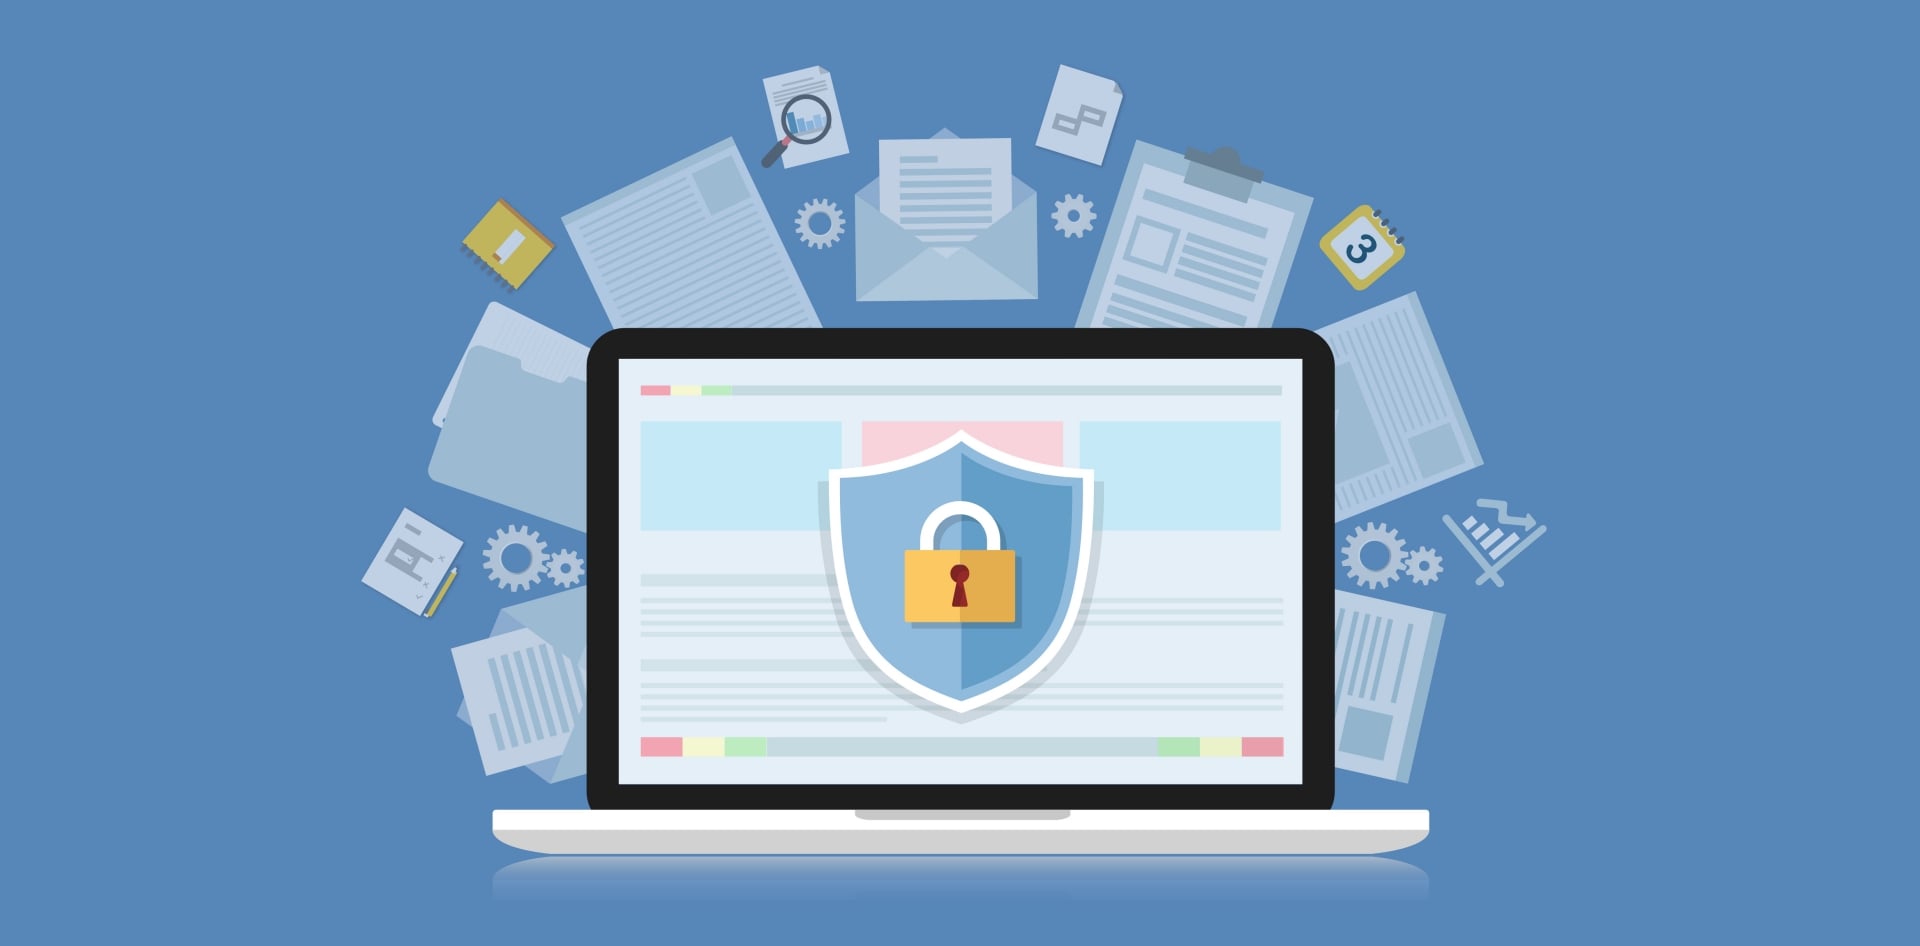 Wordpress Security Expert: Ensuring A Fortified And Trustworthy Online Presence